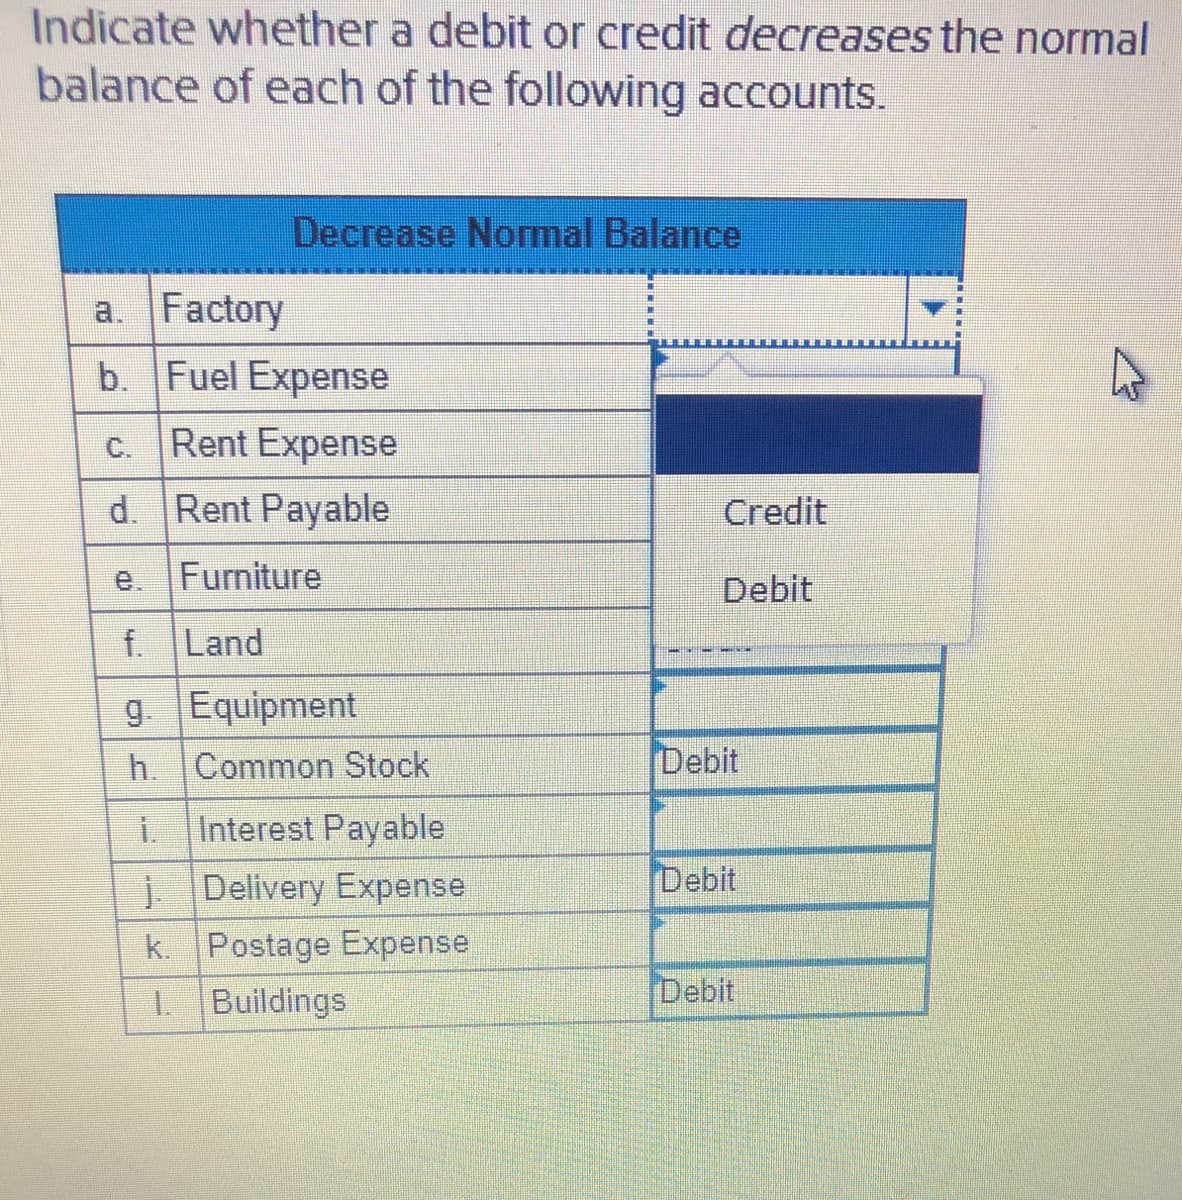 Indicate whether a debit or credit decreases the normal
balance of each of the following accounts.
Decrease Normal Balance
a. Factory
b. Fuel Expense
Rent Expense
d. Rent Payable
C.
Credit
e.
Furniture
Debit
f. Land
9 Equipment
h. Common Stock
Debit
Interest Payable
Debit
j Delivery Expense
k. Postage Expense
Buildings
Debit
